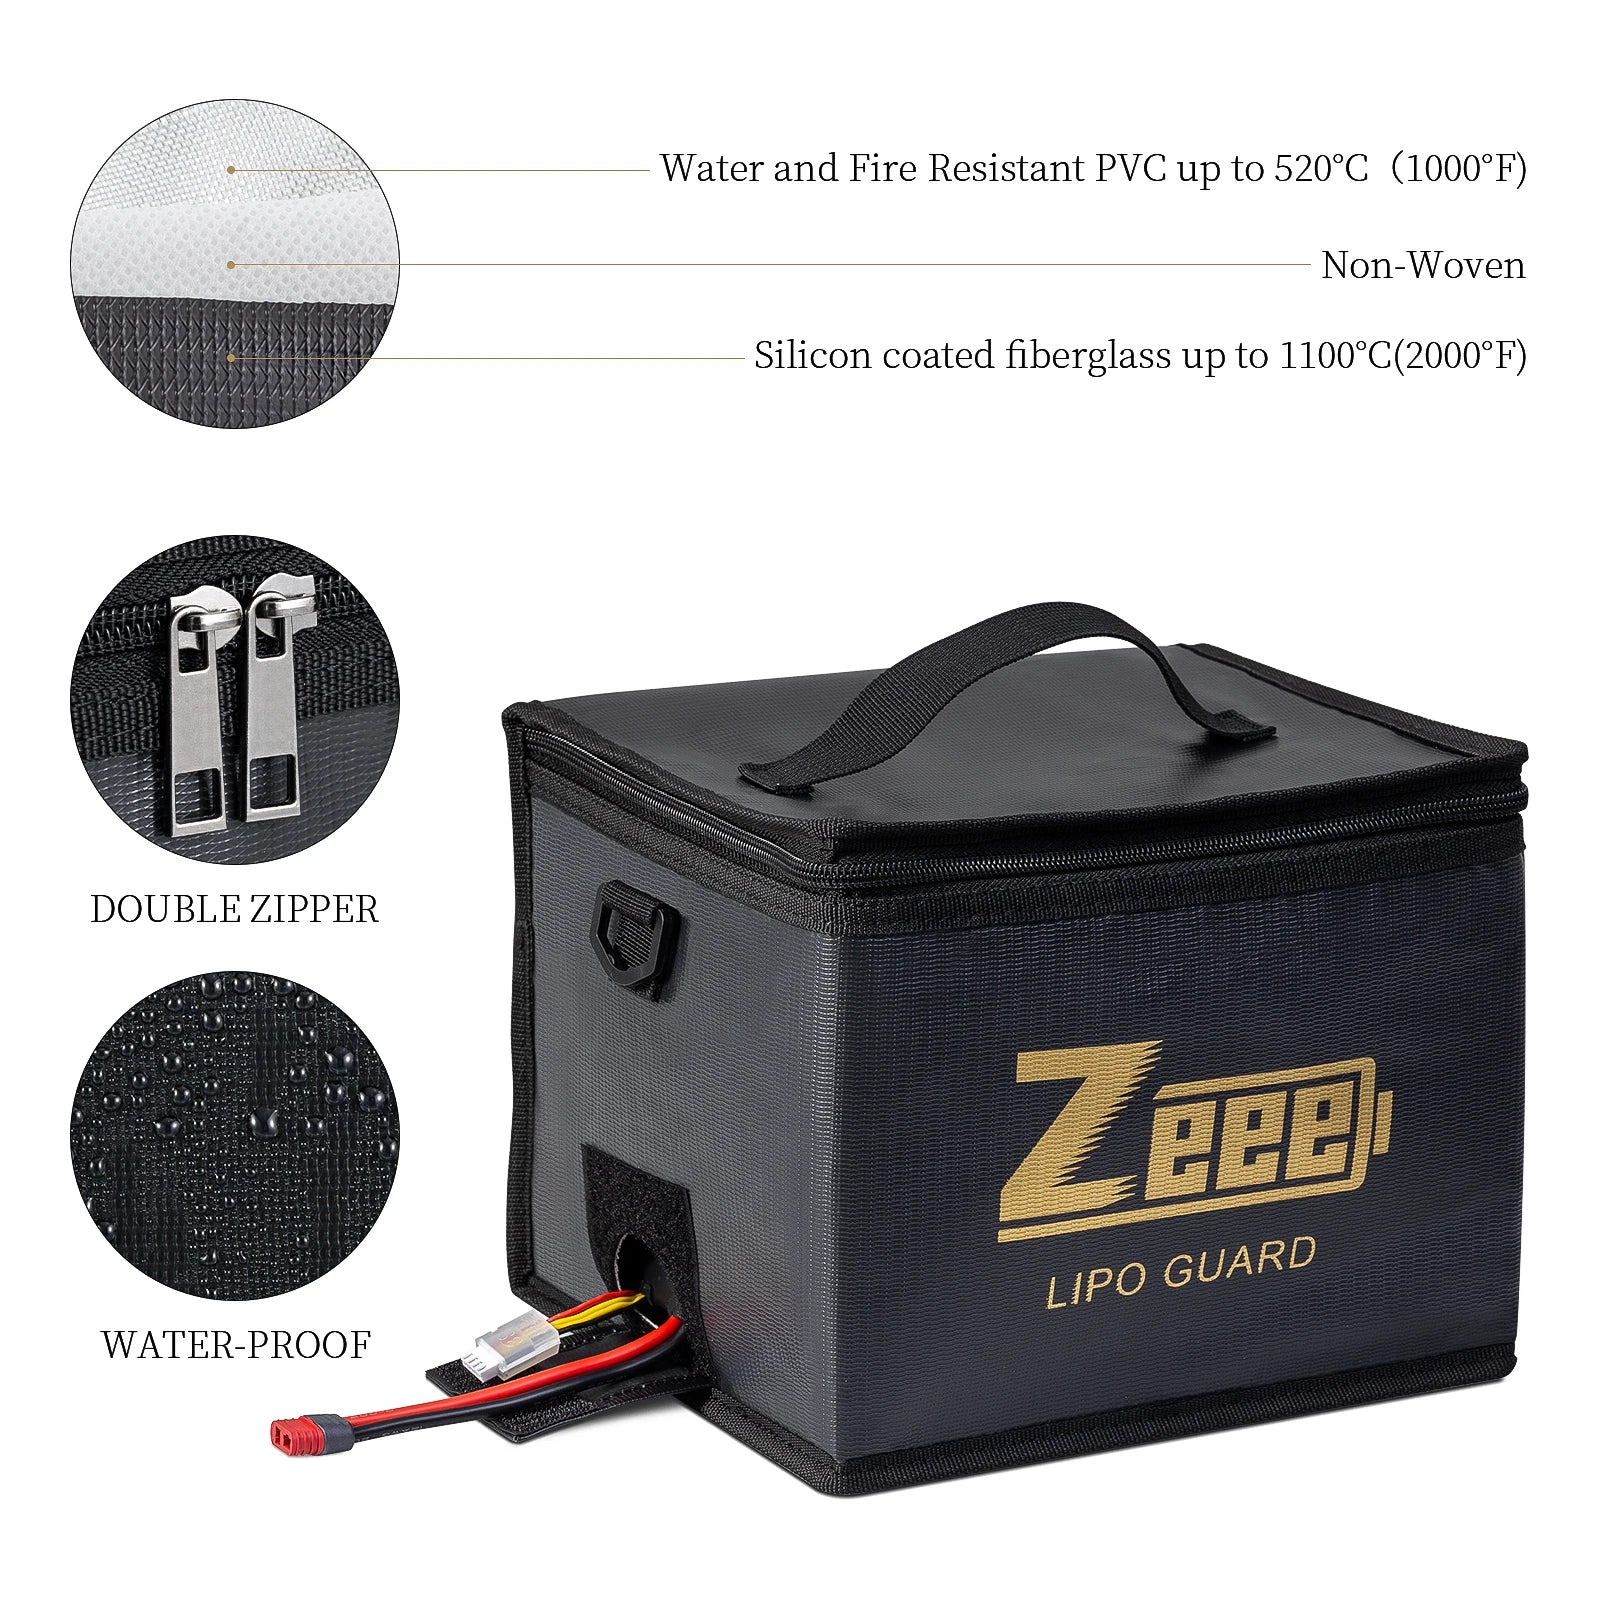 2 Size Zeee Lipo Bag, Water and Fire Resistant PVC up to 520*C (1000PF) Non